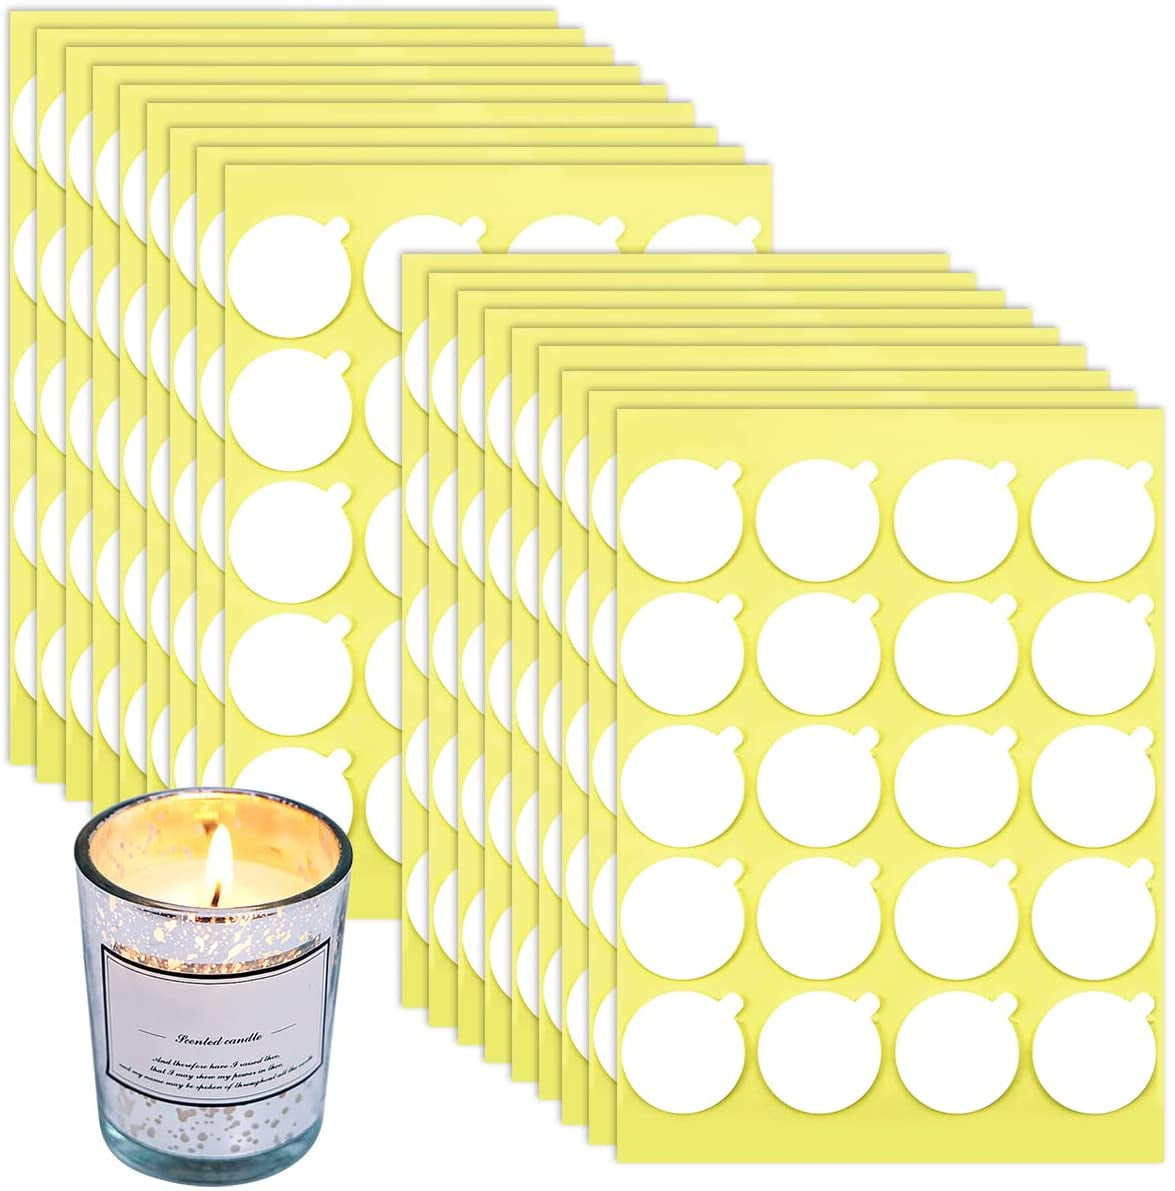 CandleScience Wick Stickers Pro | Wick Adhesive Stickers for Candle Making 120 PC Pack